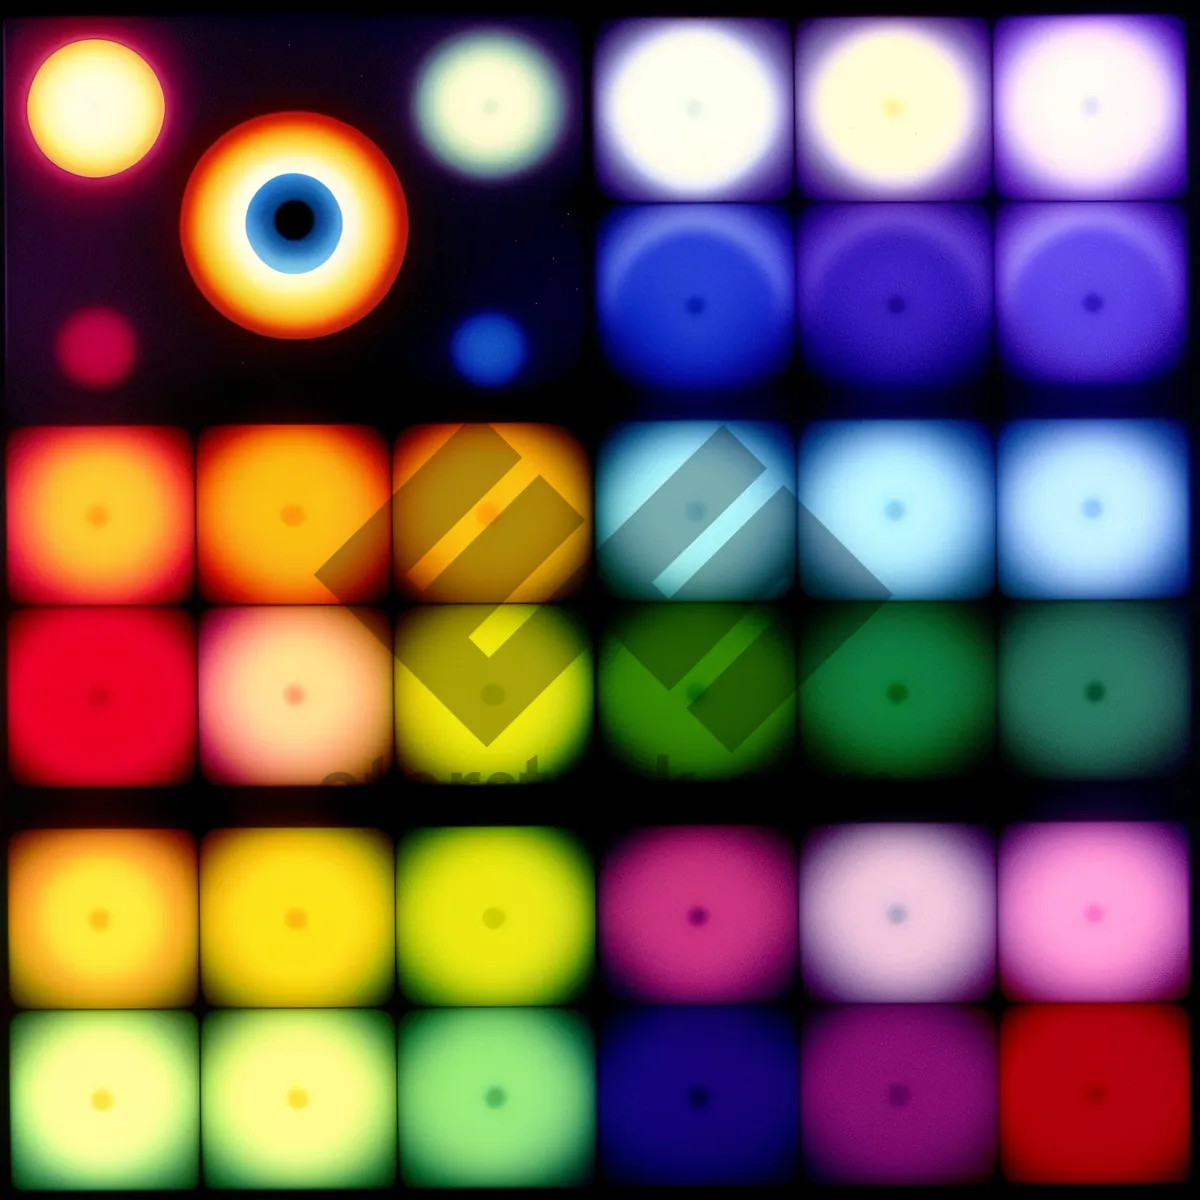 Picture of Shiny Plasma Art: Bright Circle Pattern with Polka Dots